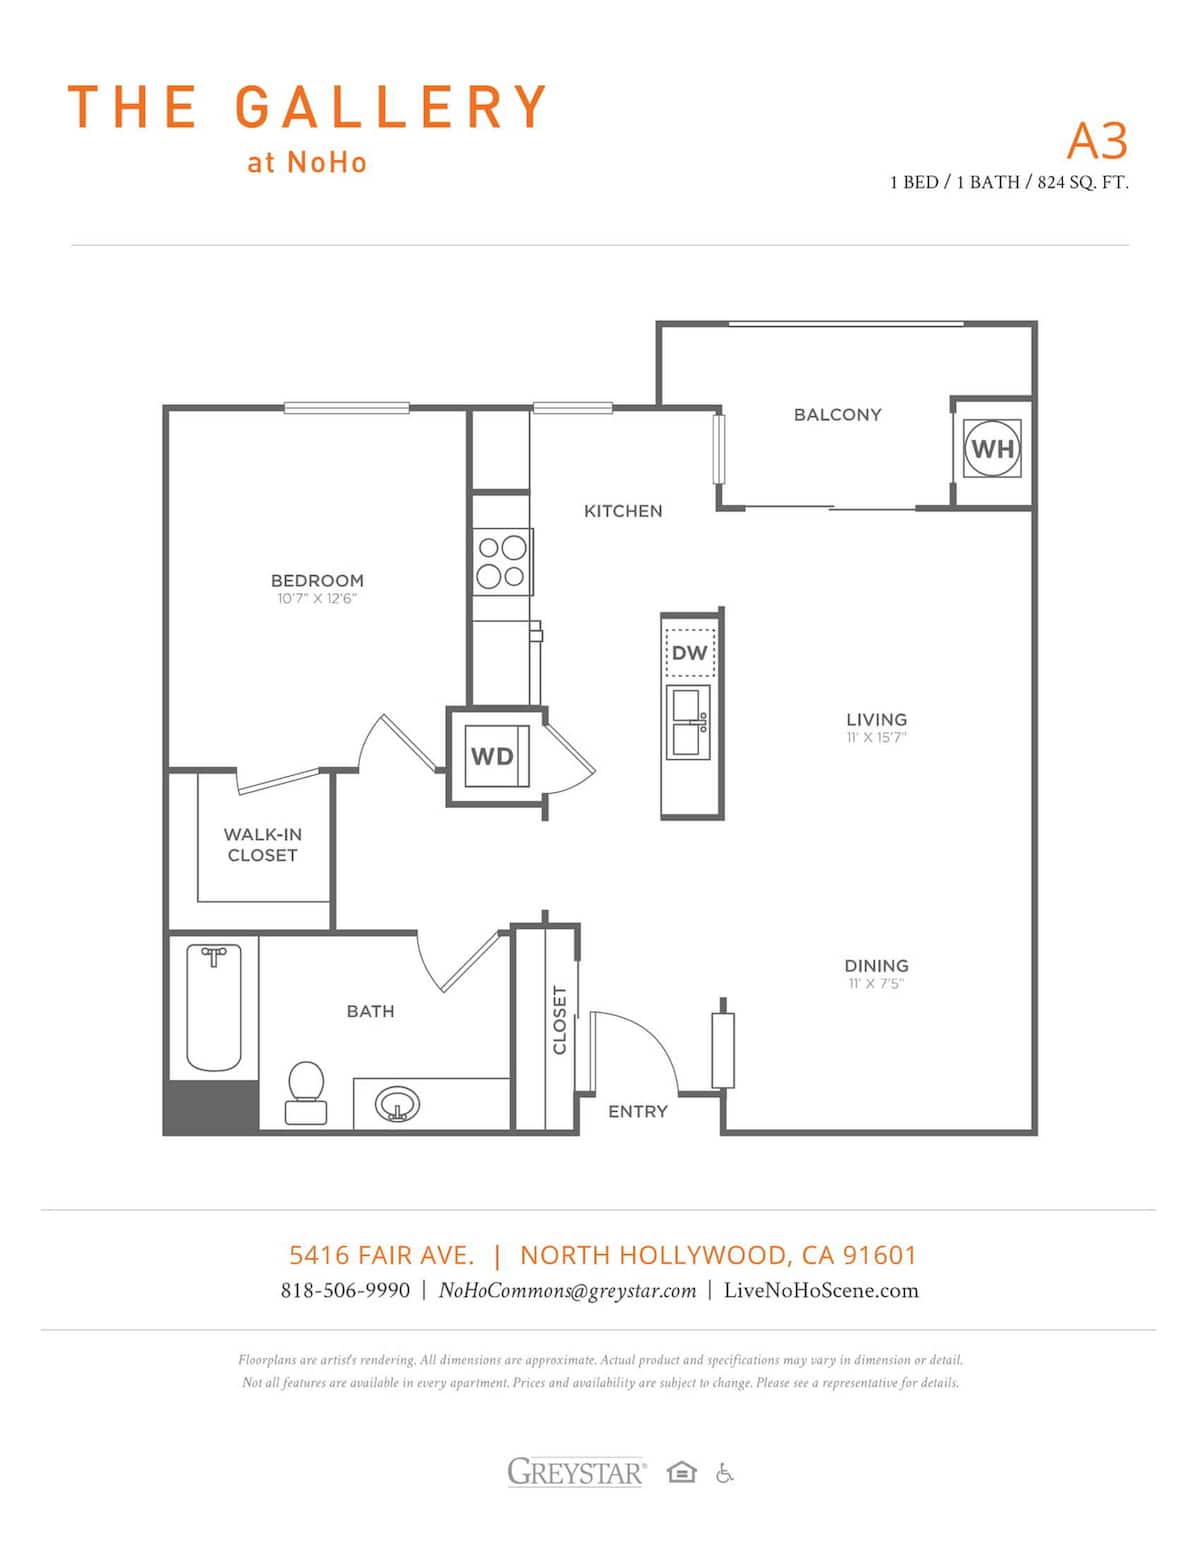 Floorplan diagram for A3 - Classic, showing 1 bedroom